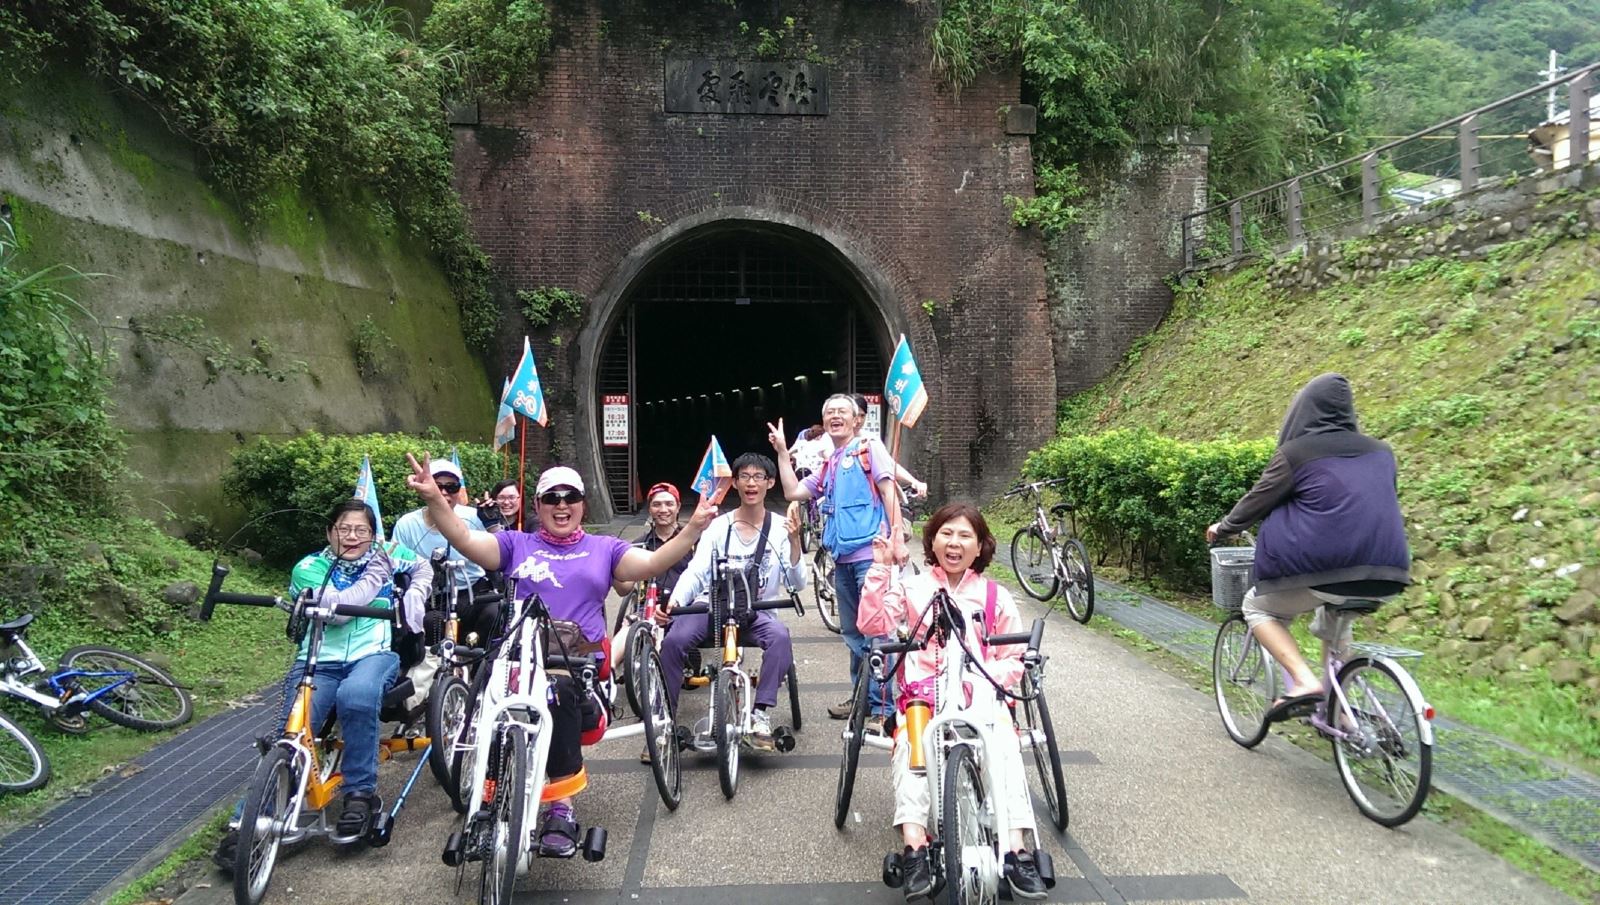 Old Caoling Tunnel provides a safe and comfortable barrier-free travel environment